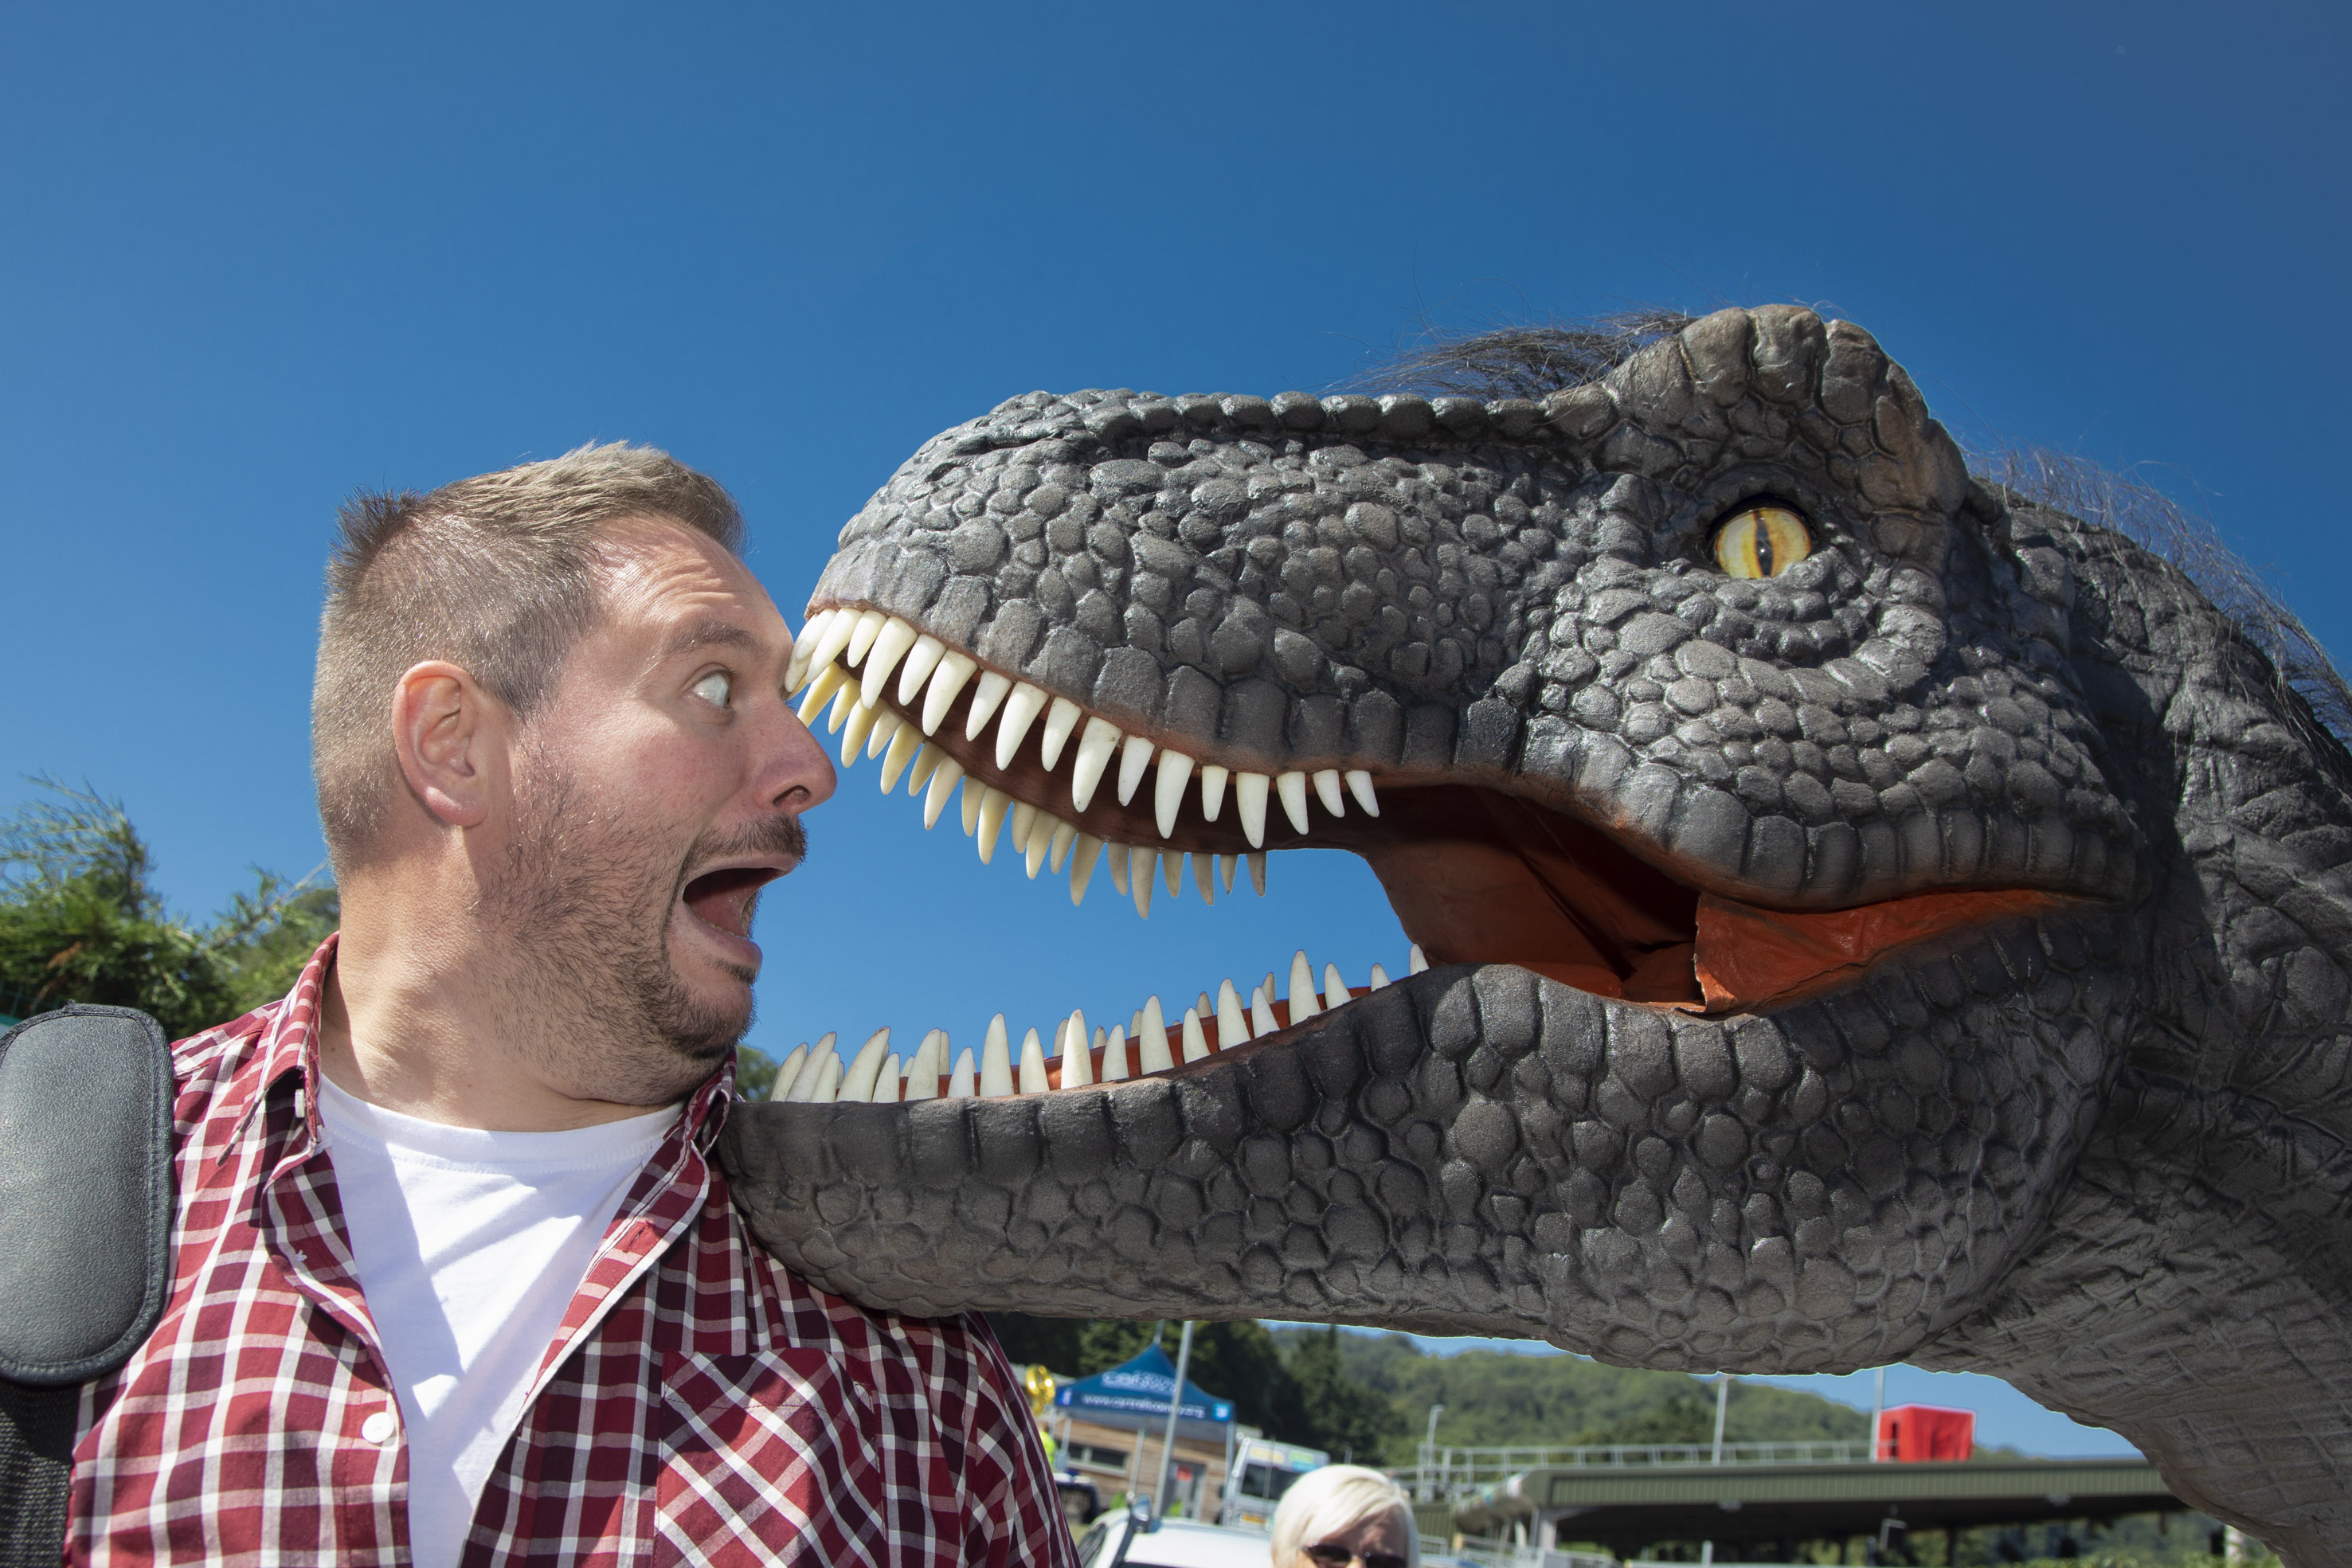 Eirias Park transformed into Jurassic Park with invasion of roaring 10ft tall dinosaurs